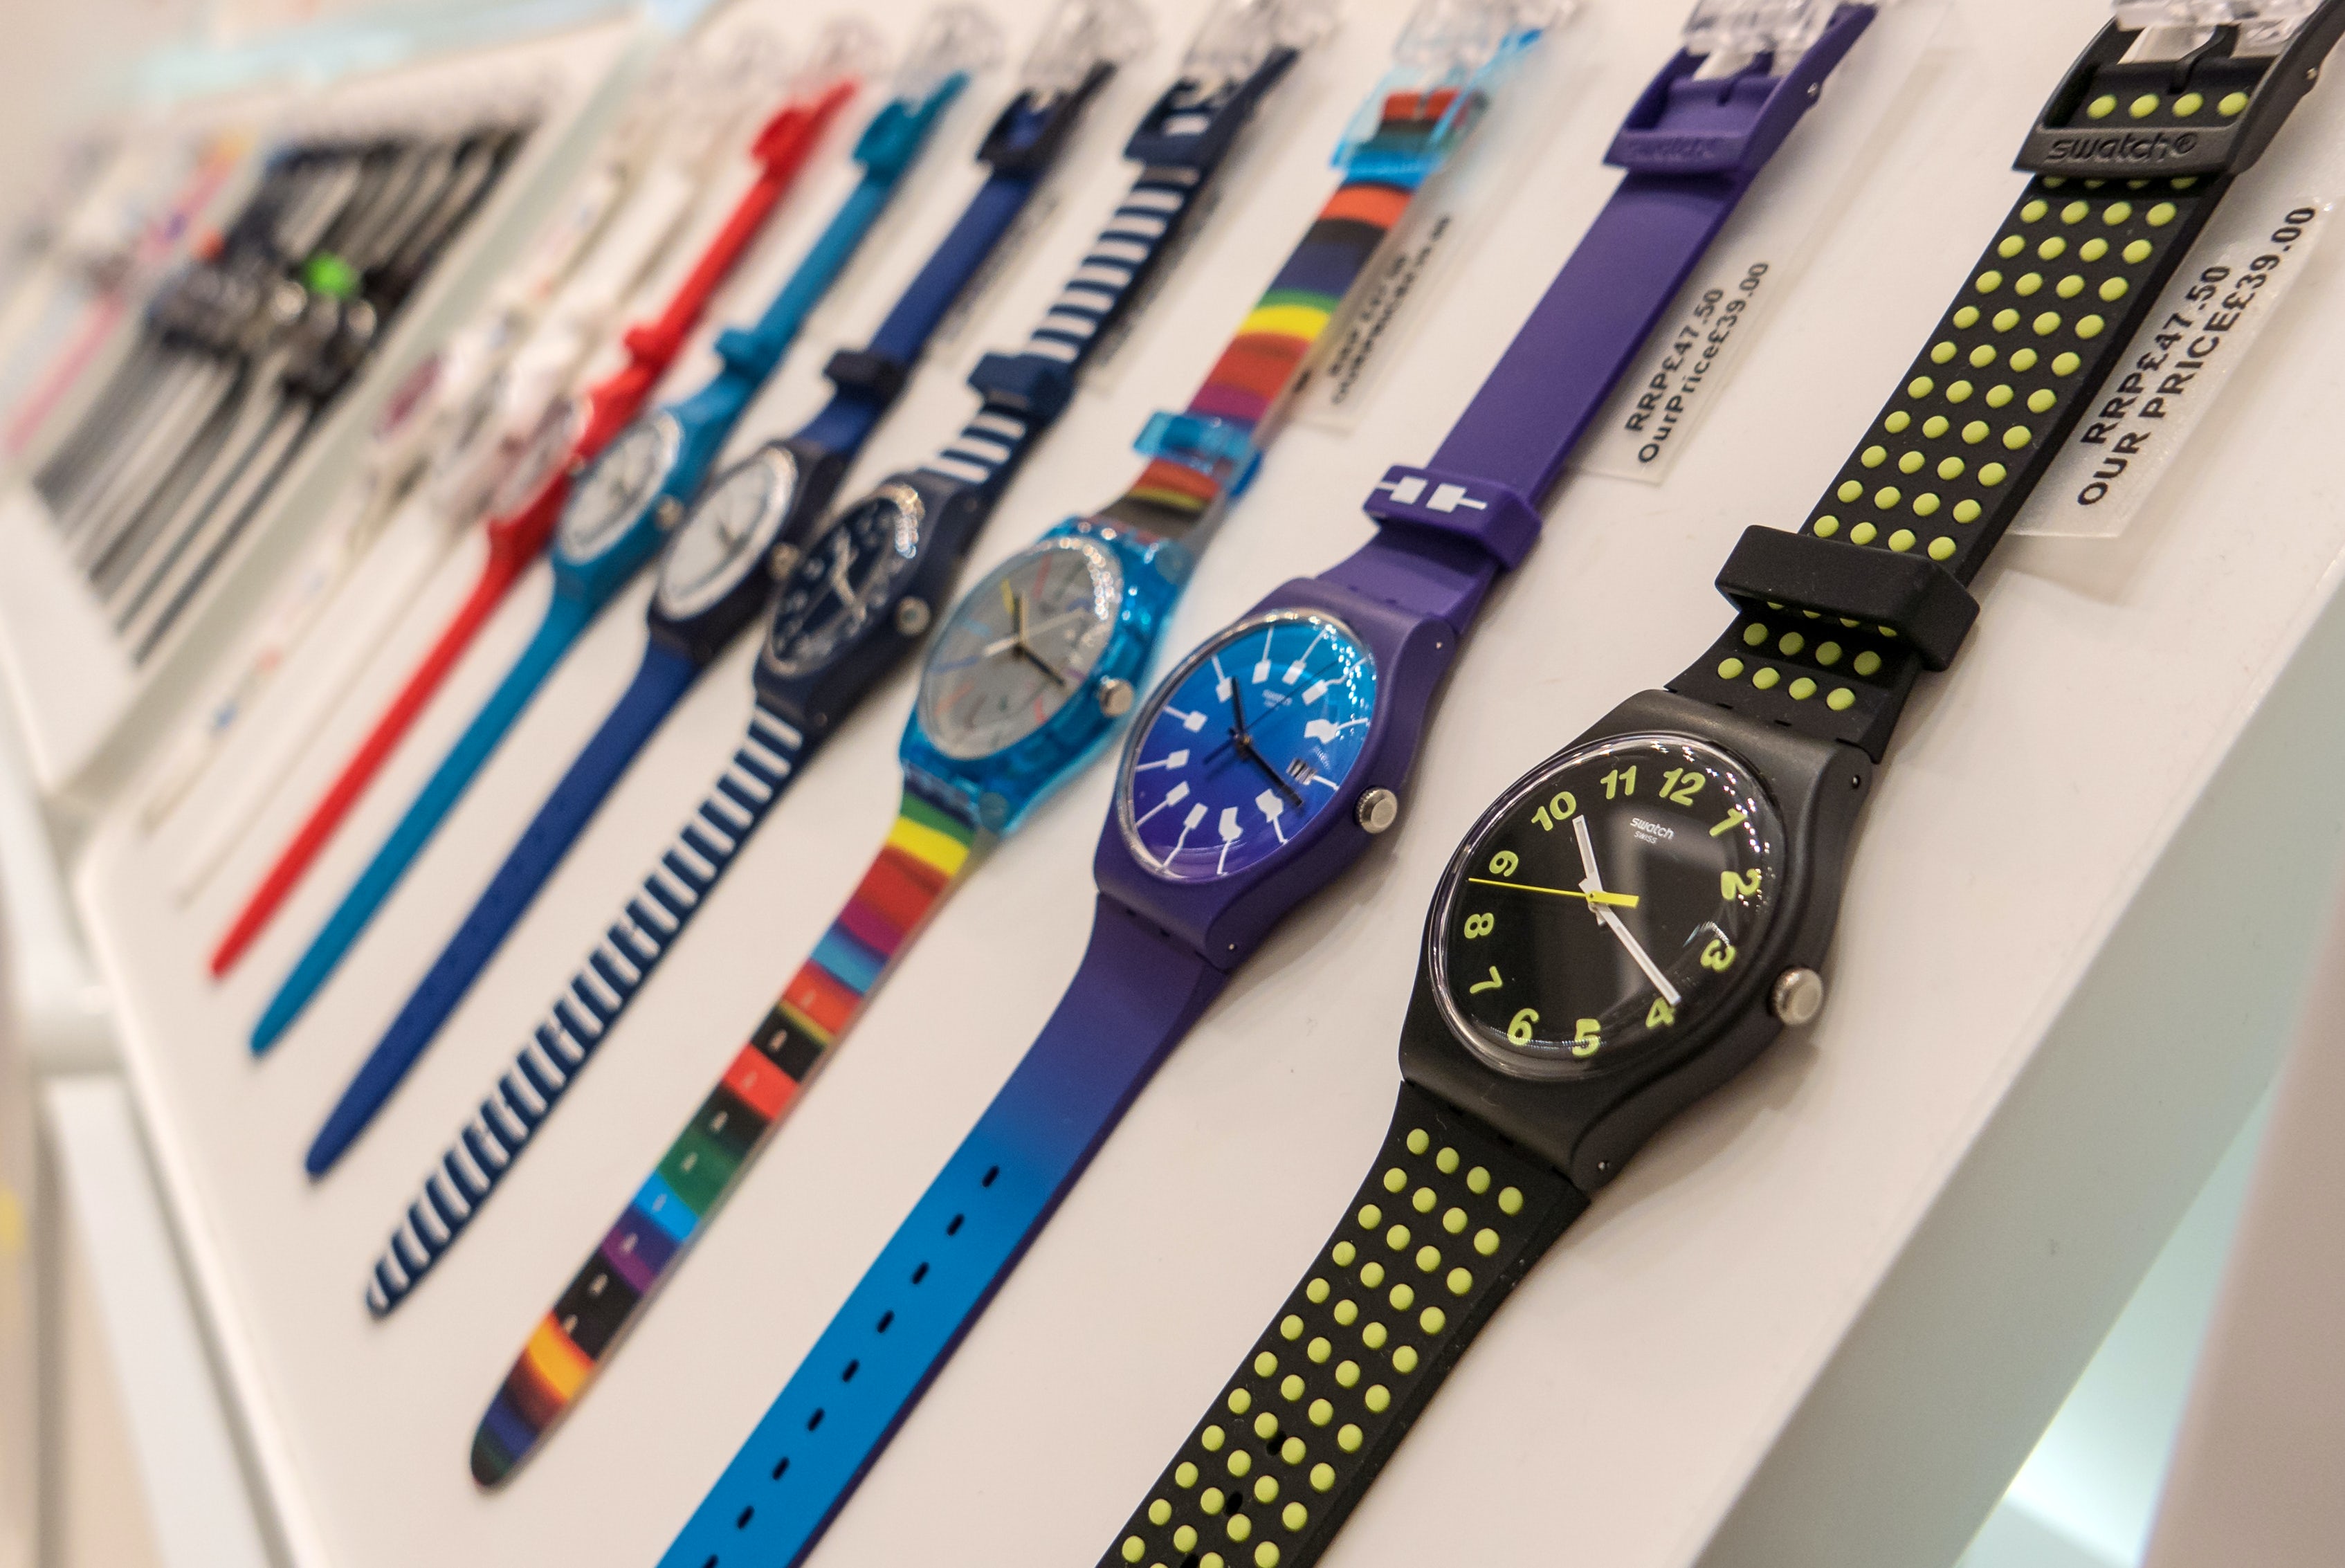 Swatch Group